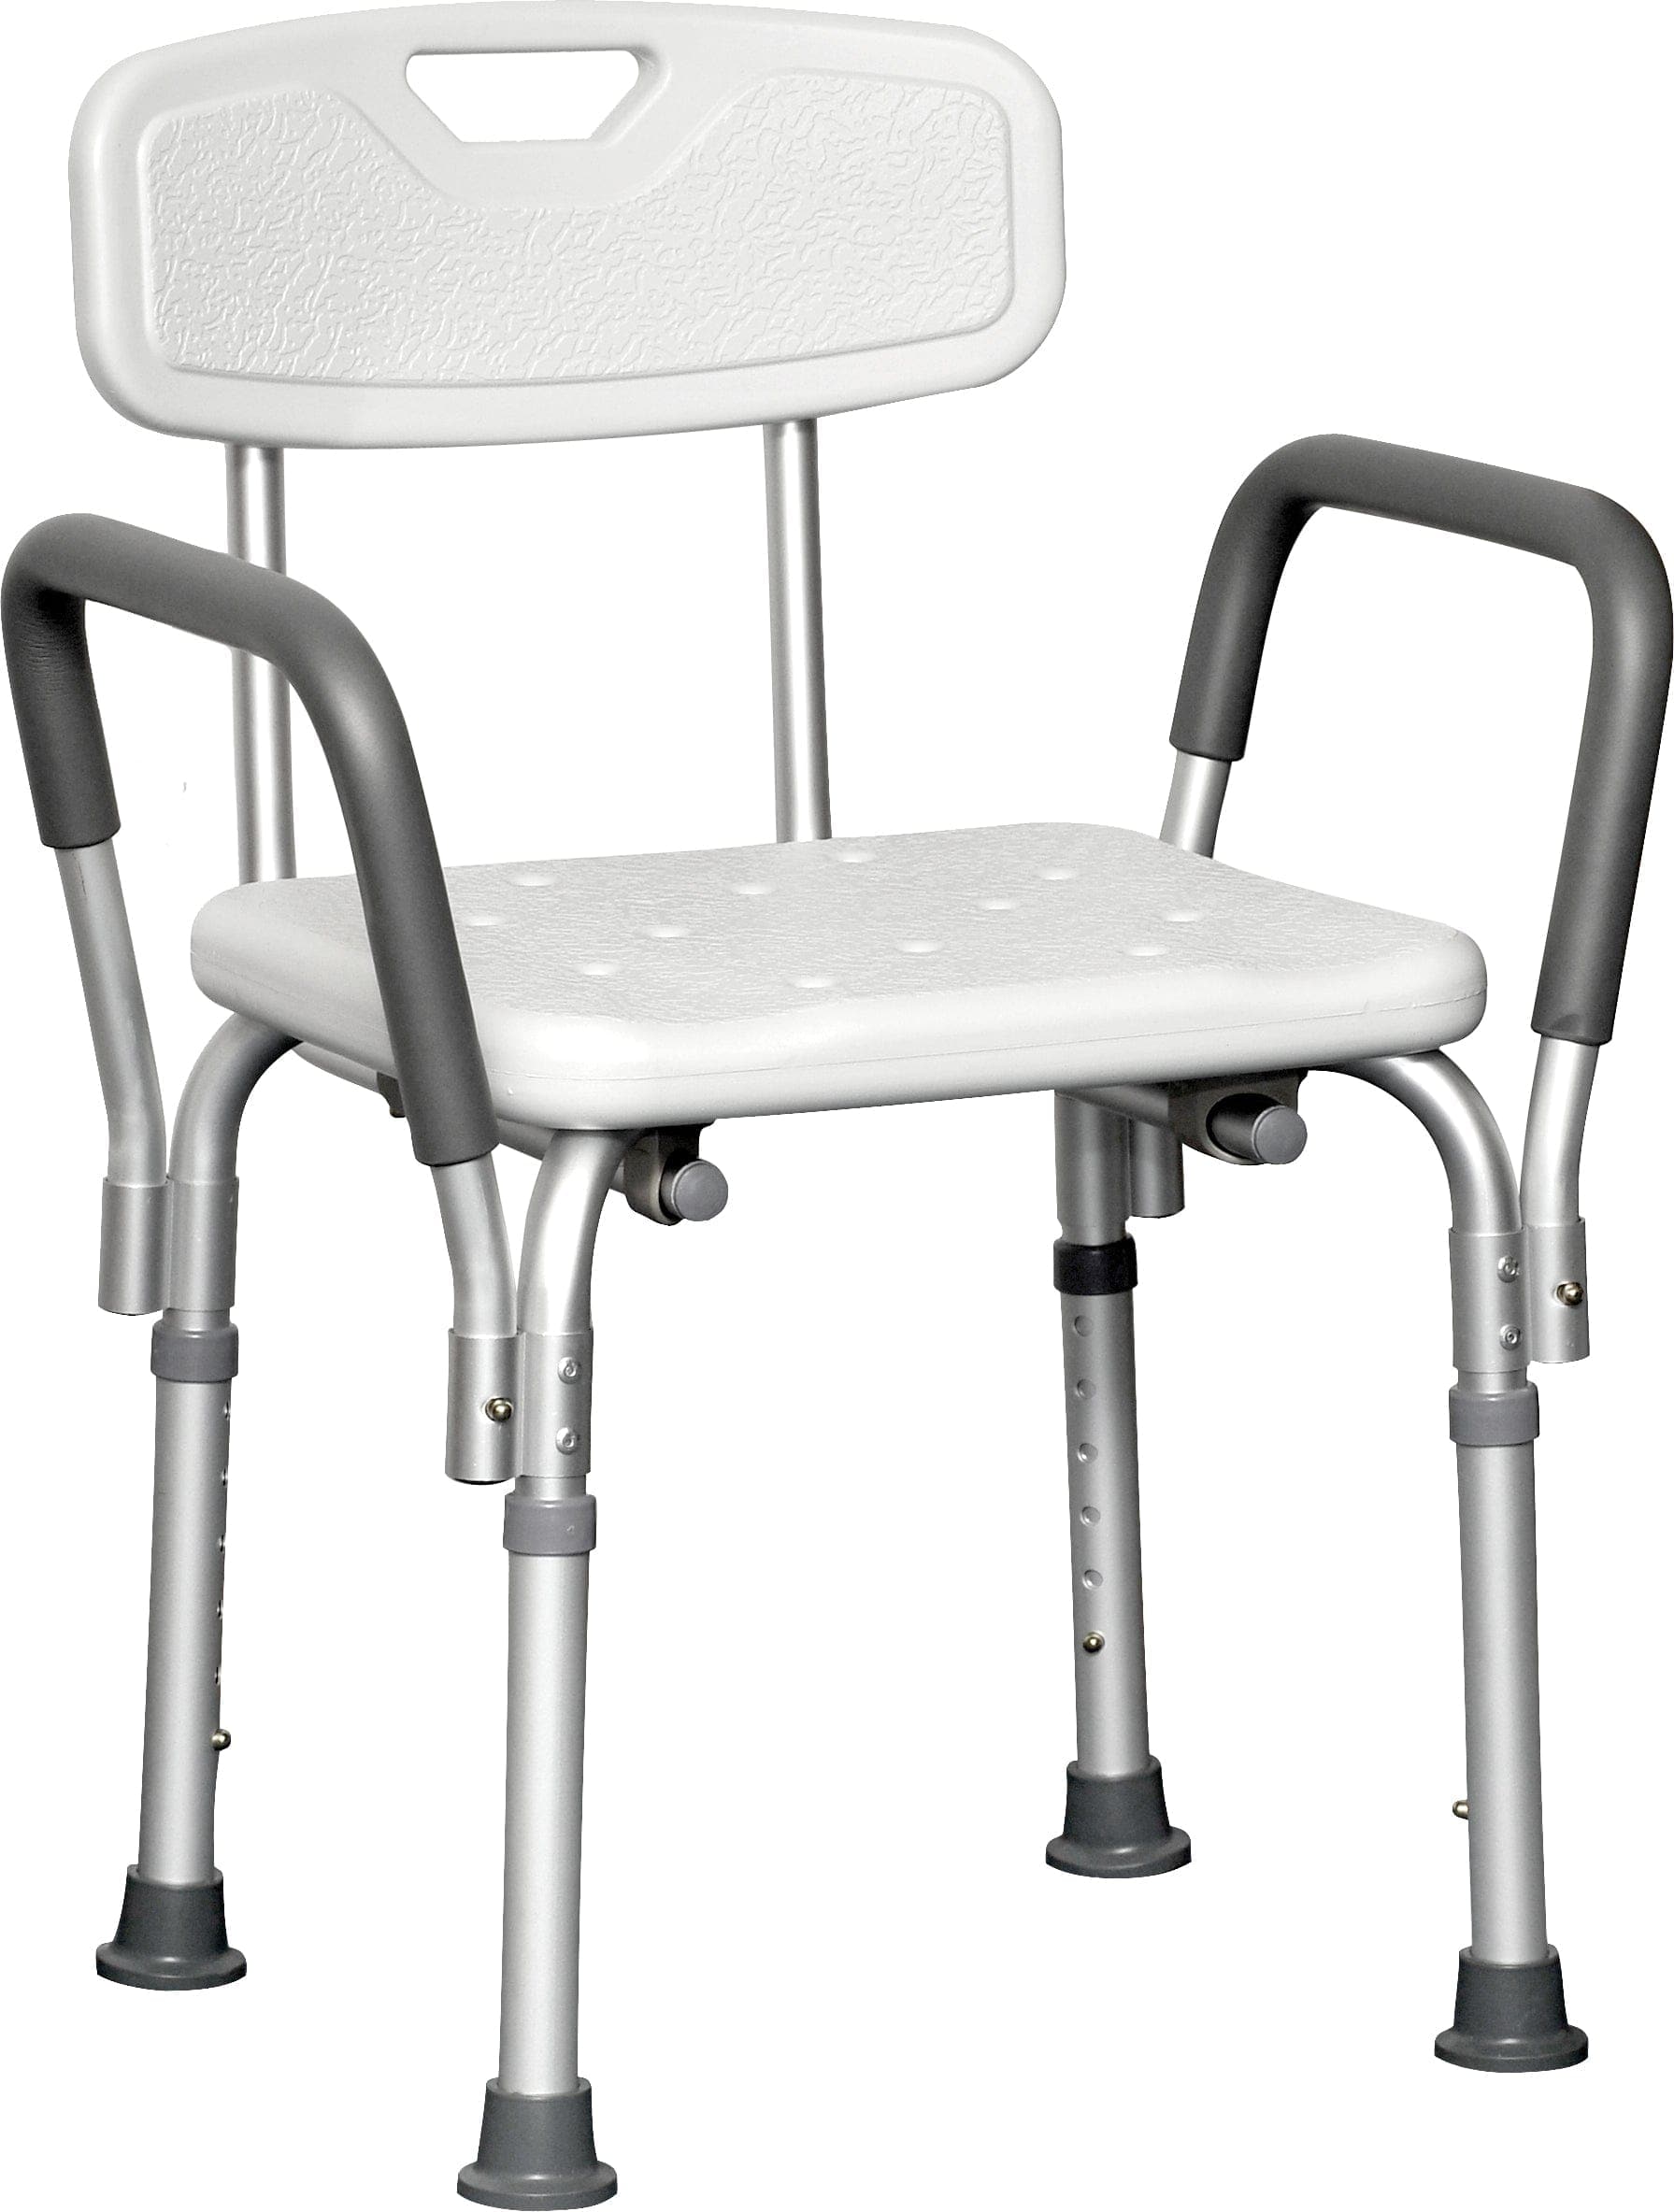 Compass Health Bath & Shower Seats Compass Health ProBasics Deluxe Shower Chair with Padded Arms